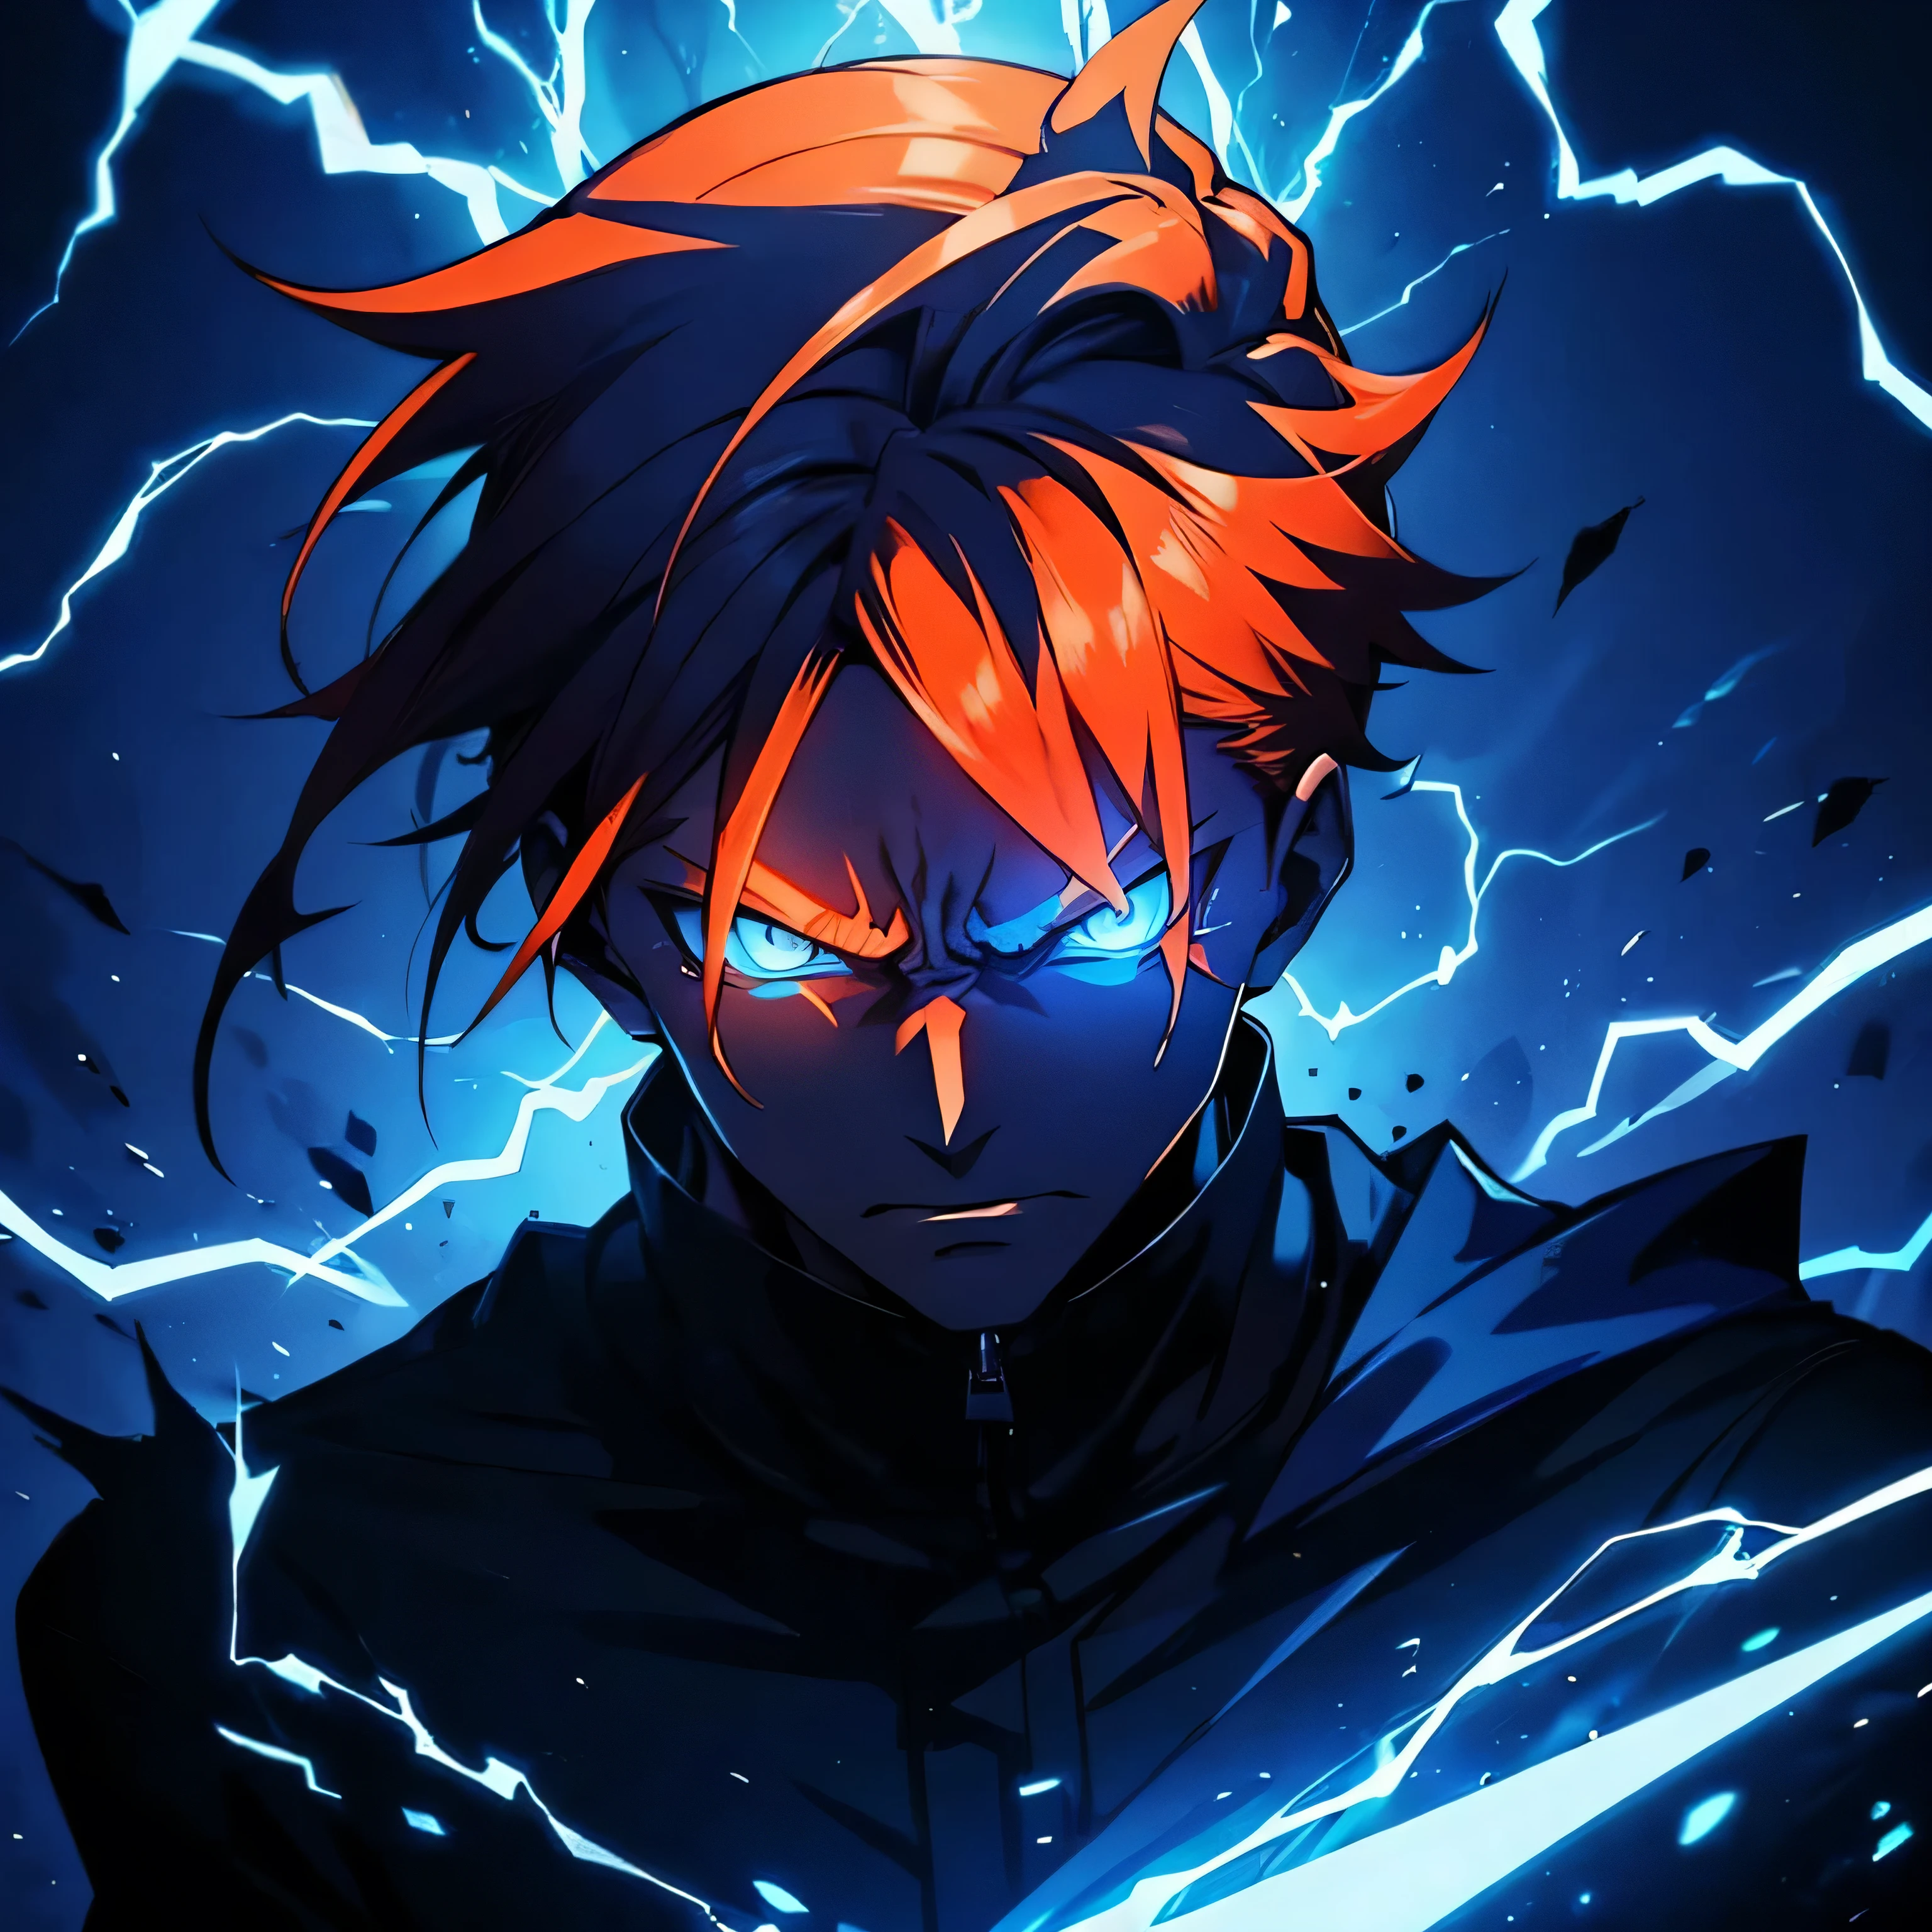 minimalistic, angry face, rap artist, man, dark shadow only see blue glowing eyes, orange hair, with clean background, special effects, blue electric aura